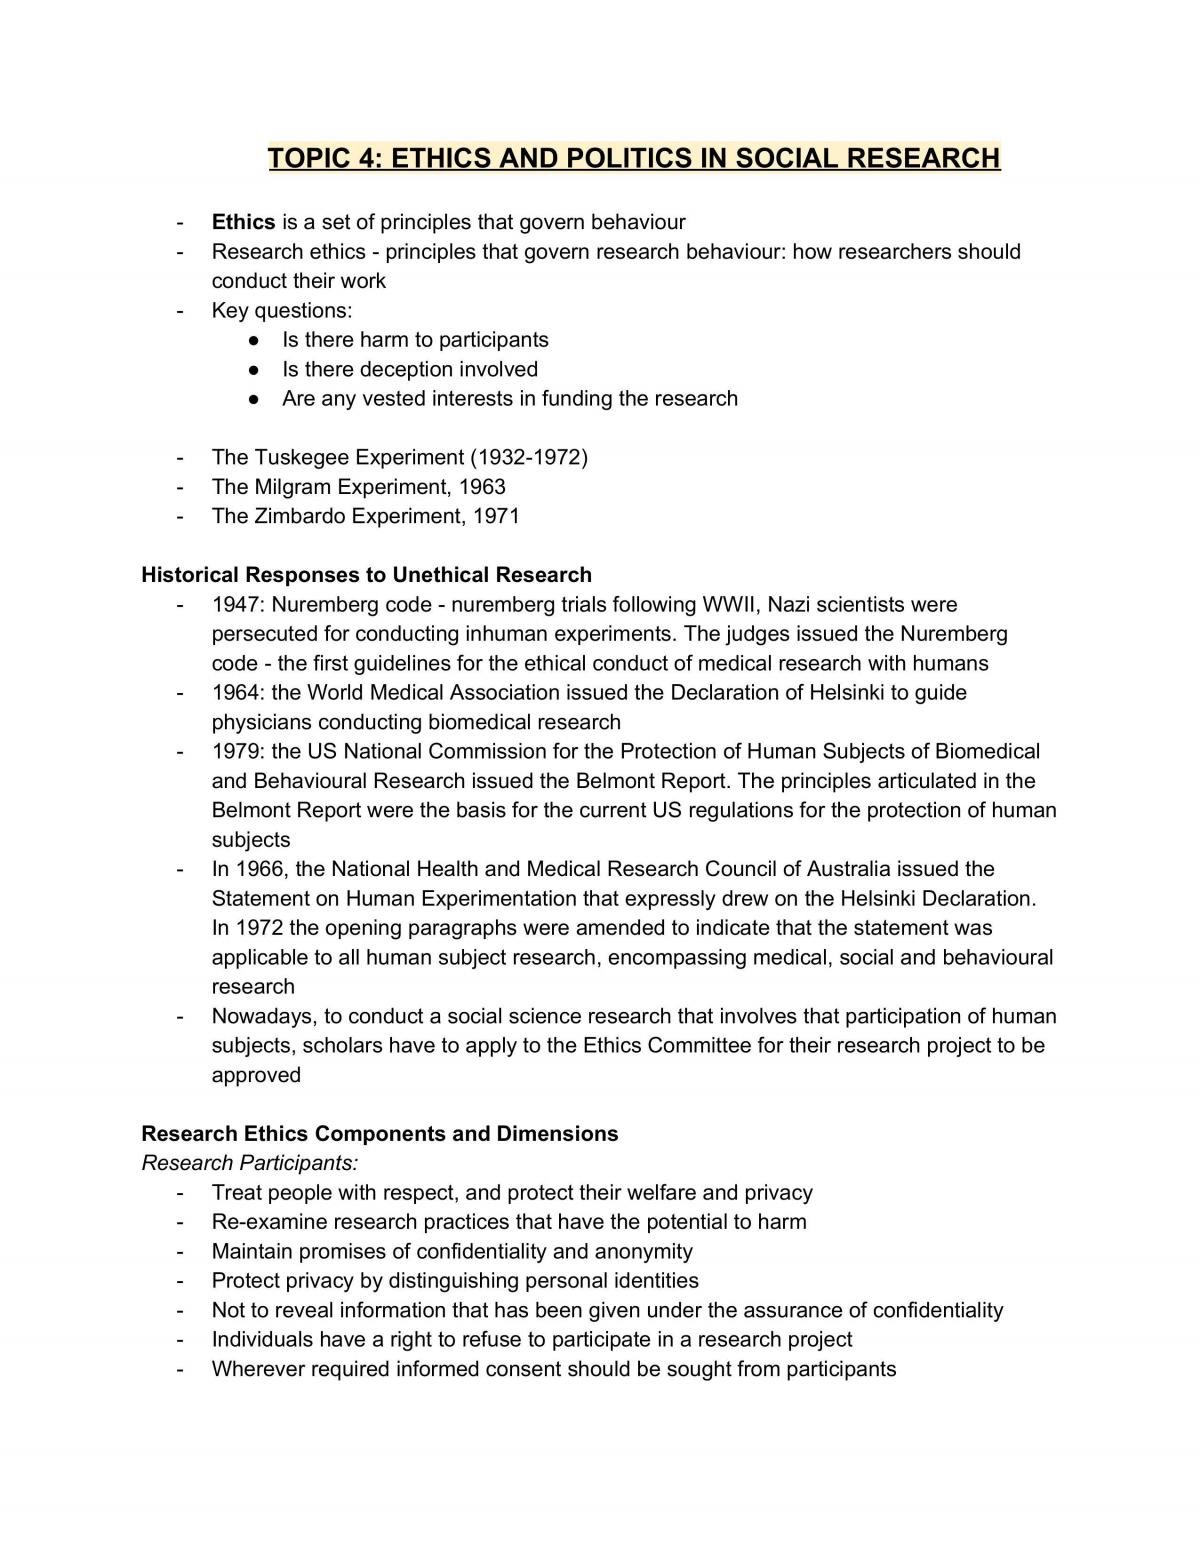 INTS206 complete notes - Page 19